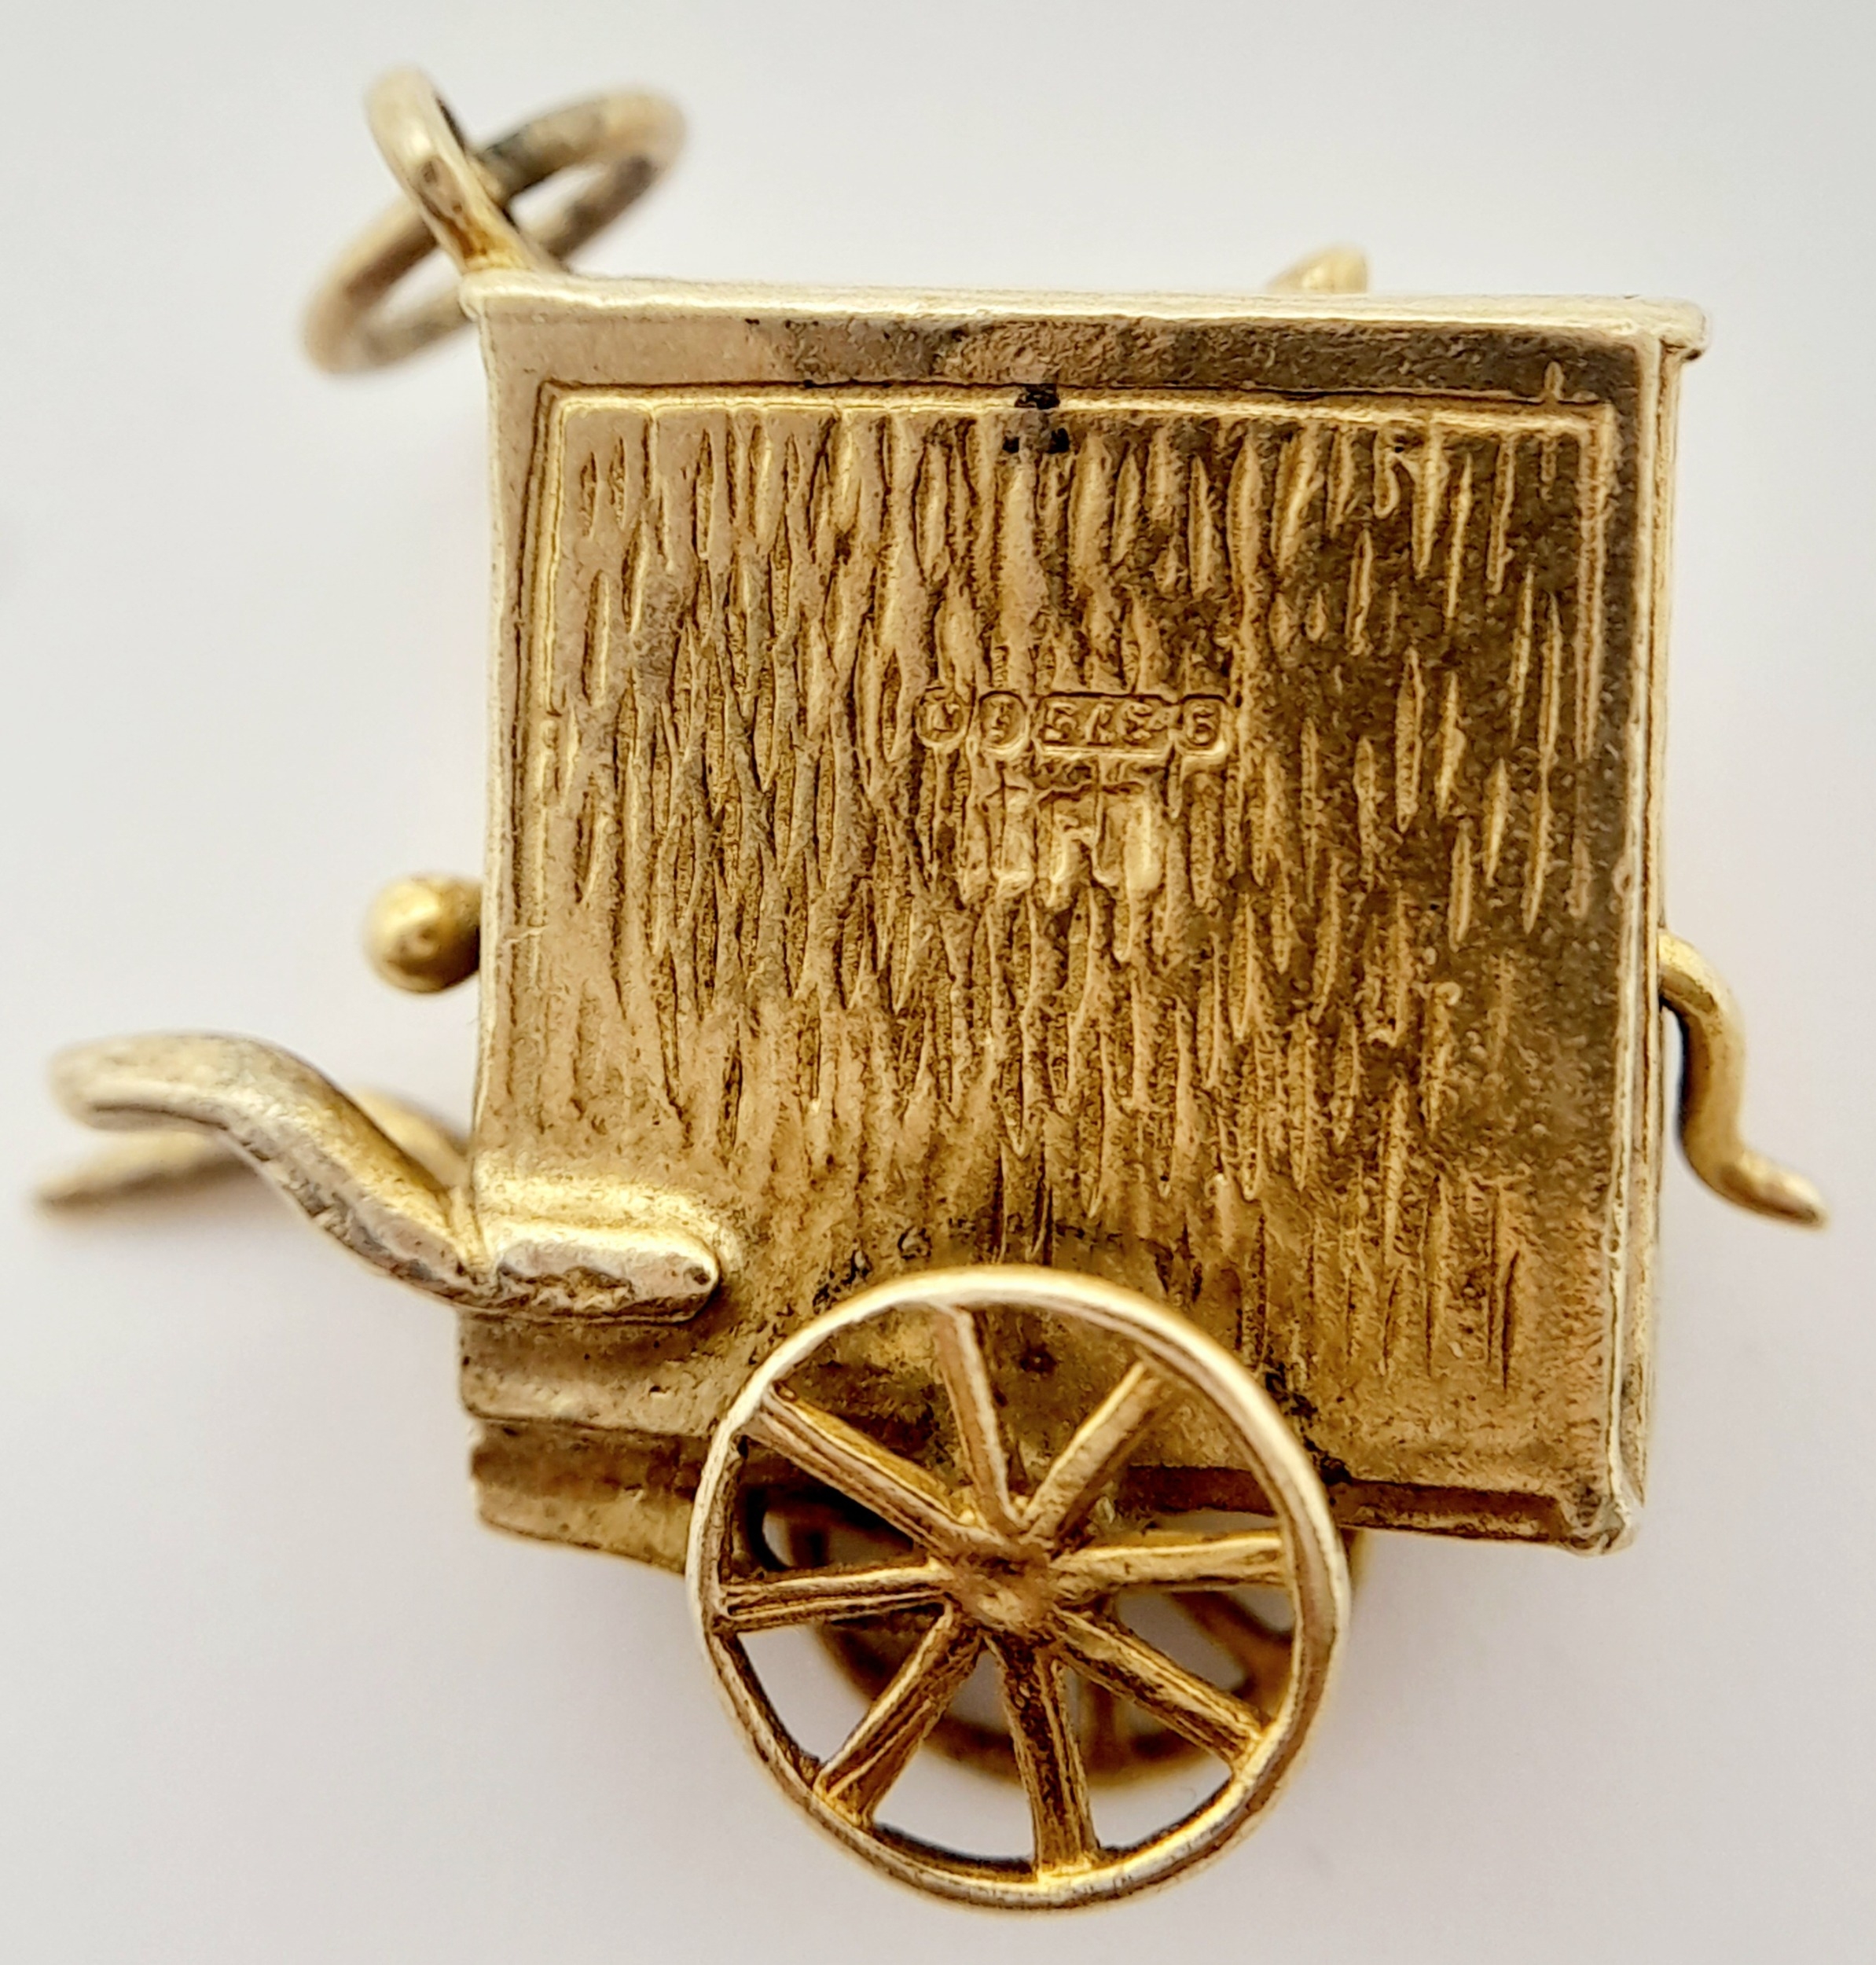 A 9K YELLOW GOLD ORGAN GRINDER AND MONKEY CHARM WITH MOVING PARTS. 2.2cm x 2.5cm, 5.2g weight. - Image 2 of 6